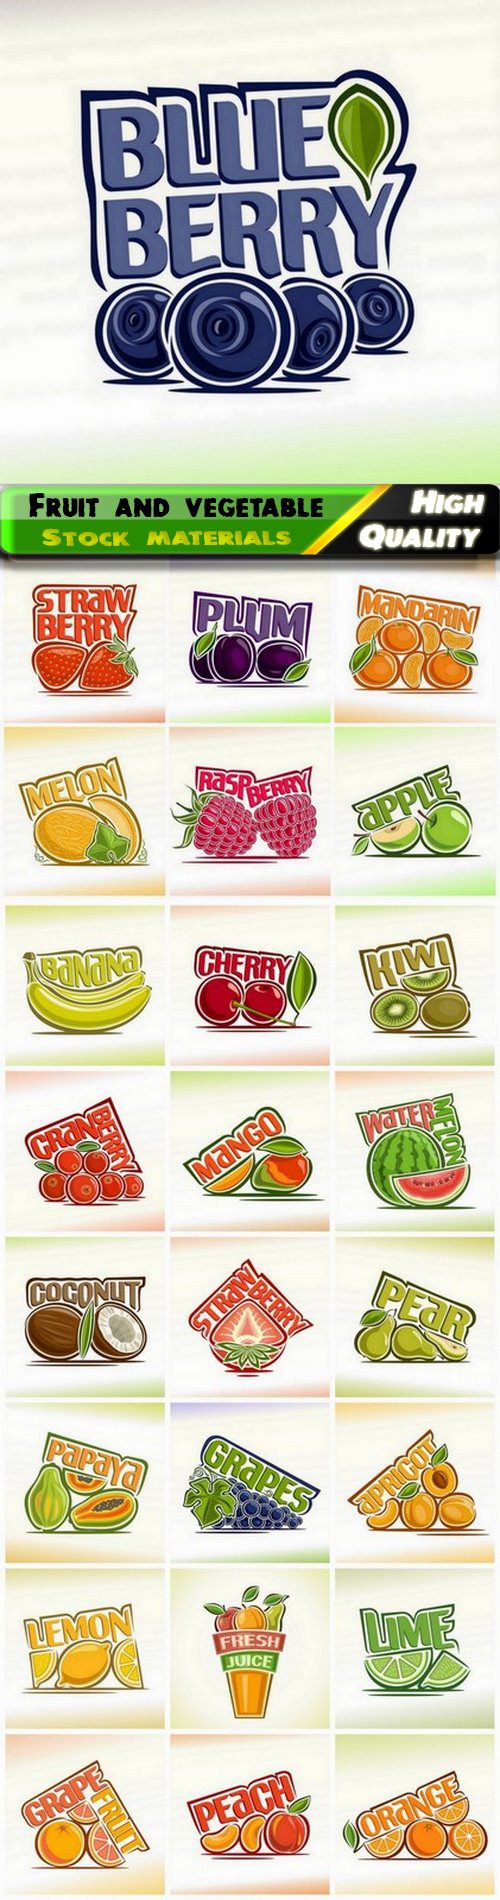 Creative fruit and vegetable illustration healthy food 25 Eps